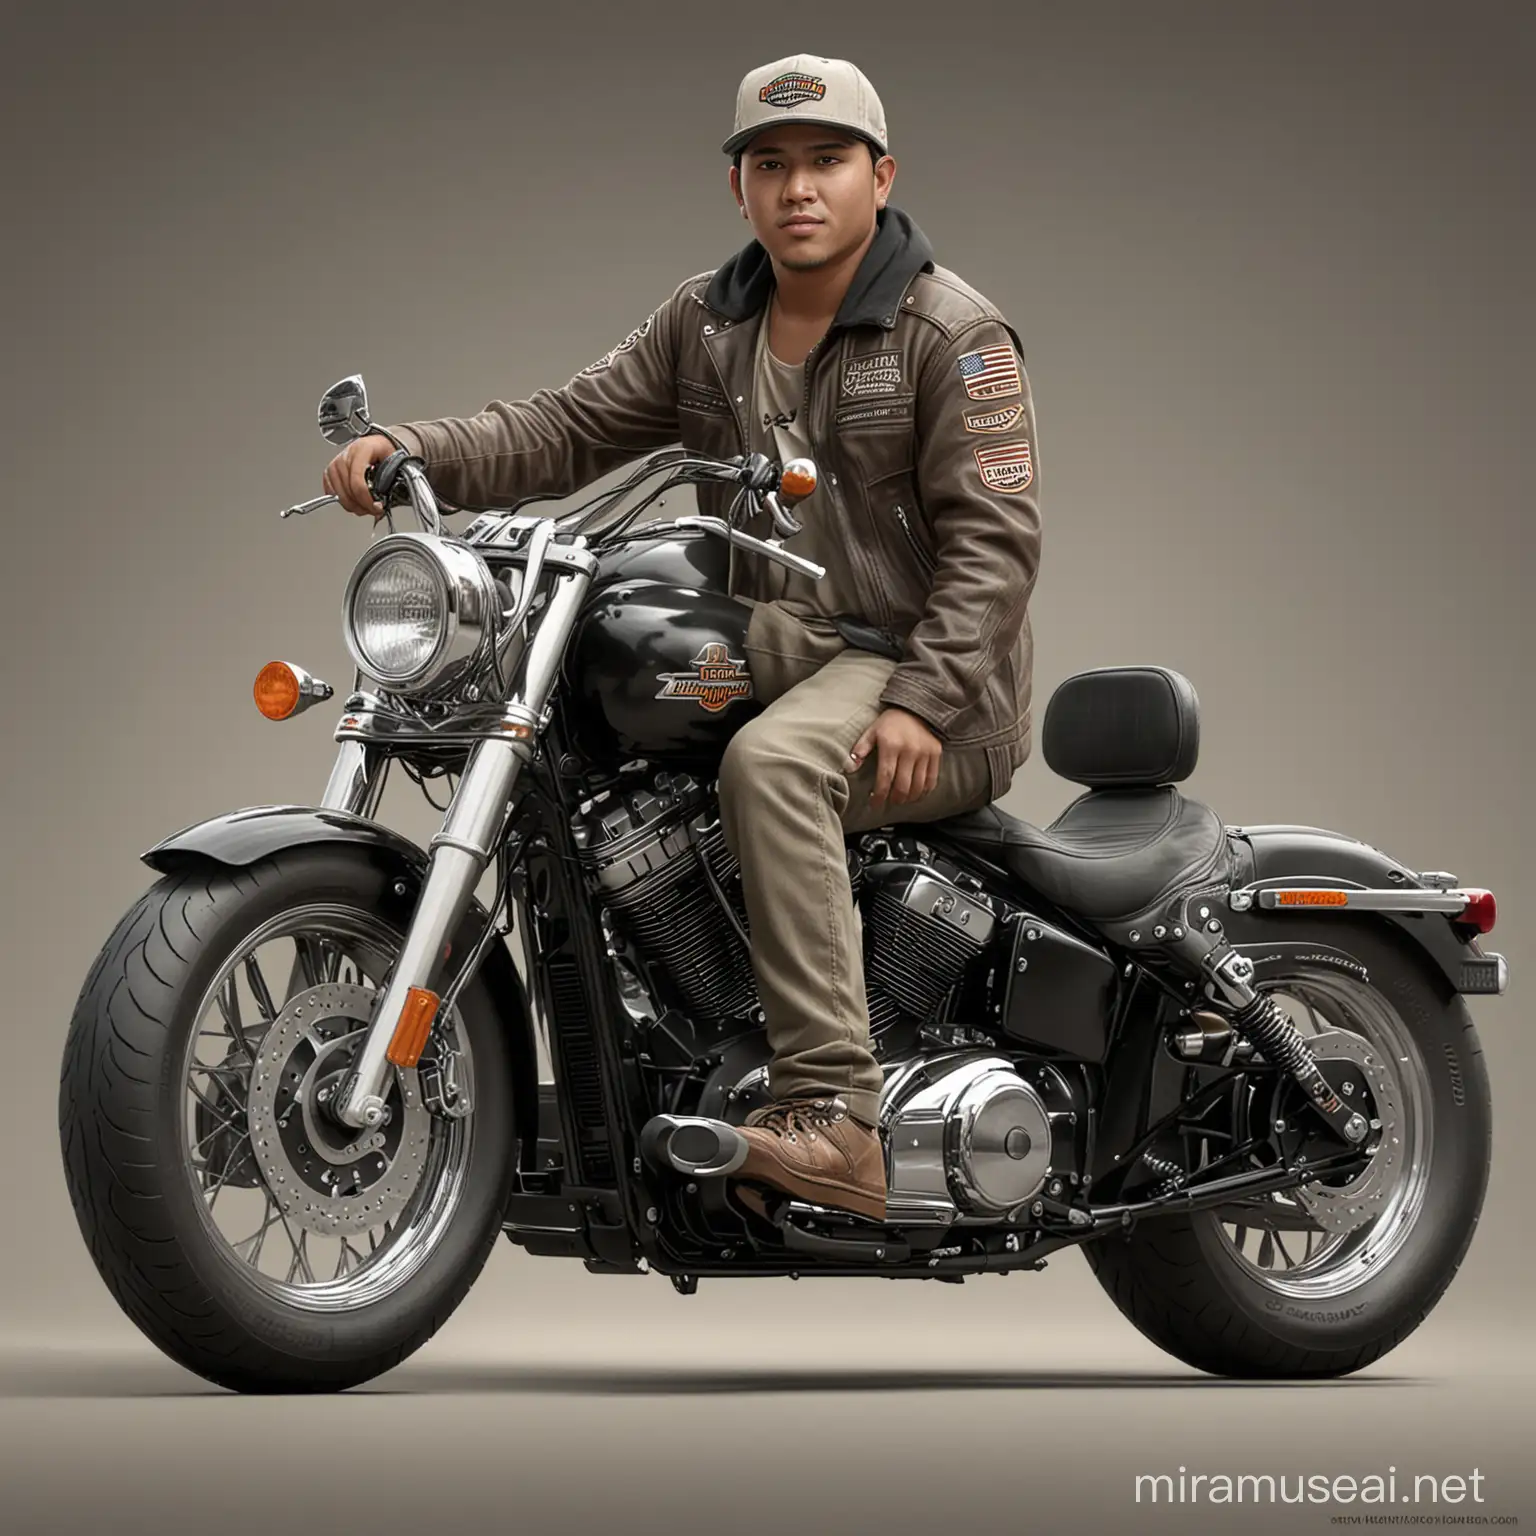 Young Indonesian Man Riding Harley Davidson Motorcycle in Urban Setting